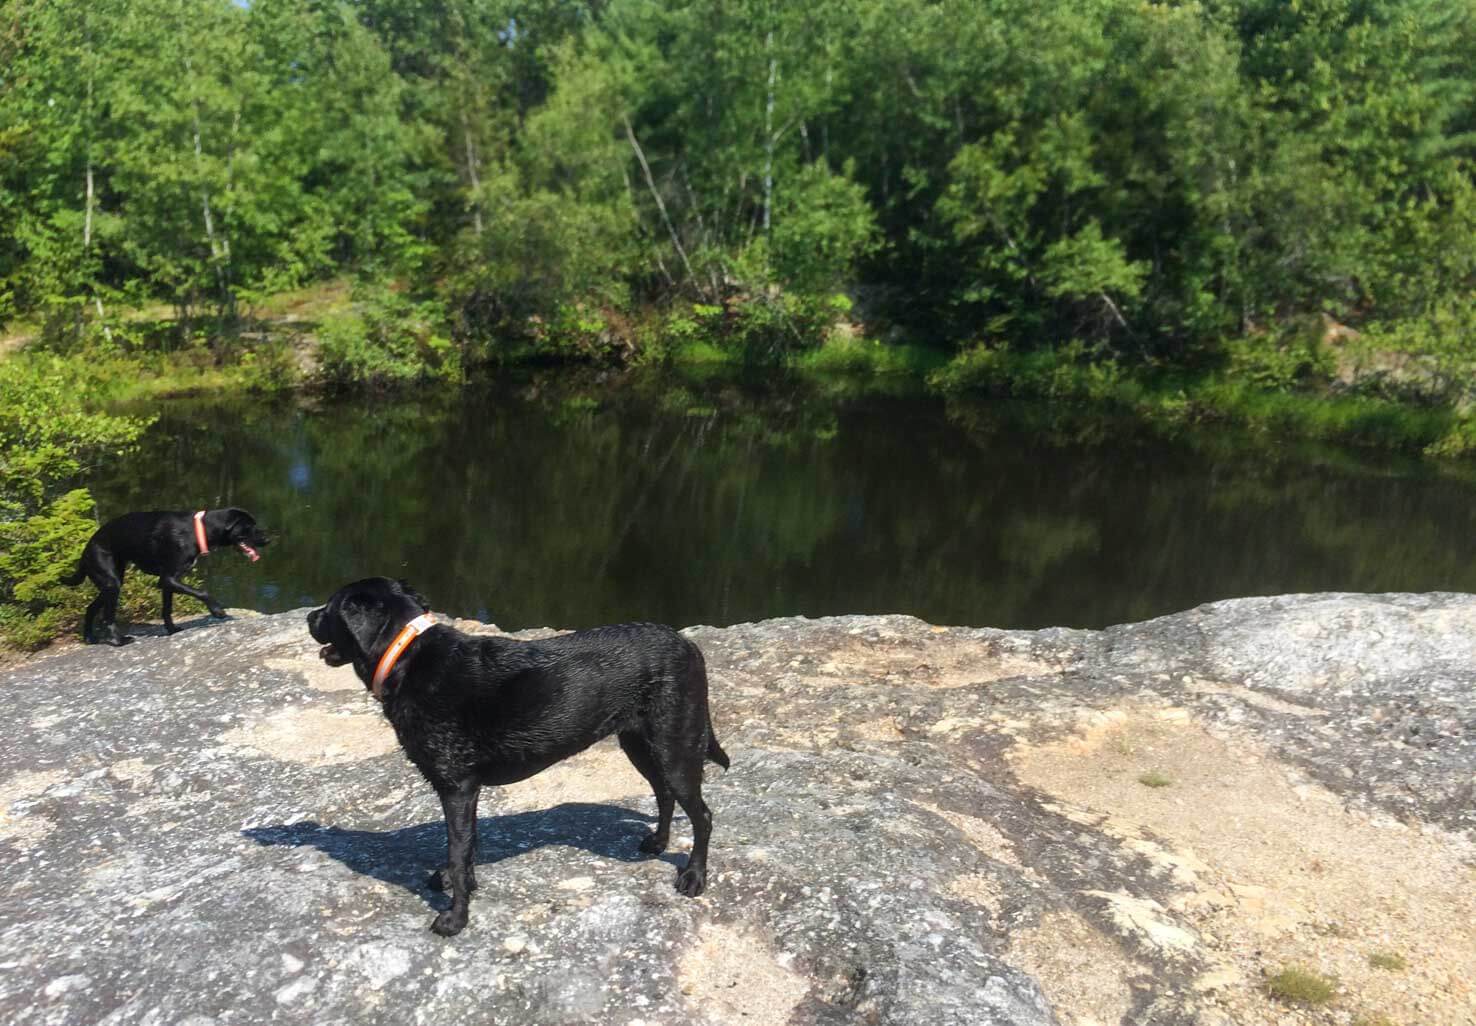 At Singepole Mountain two black dogs overlook the quarry pond.